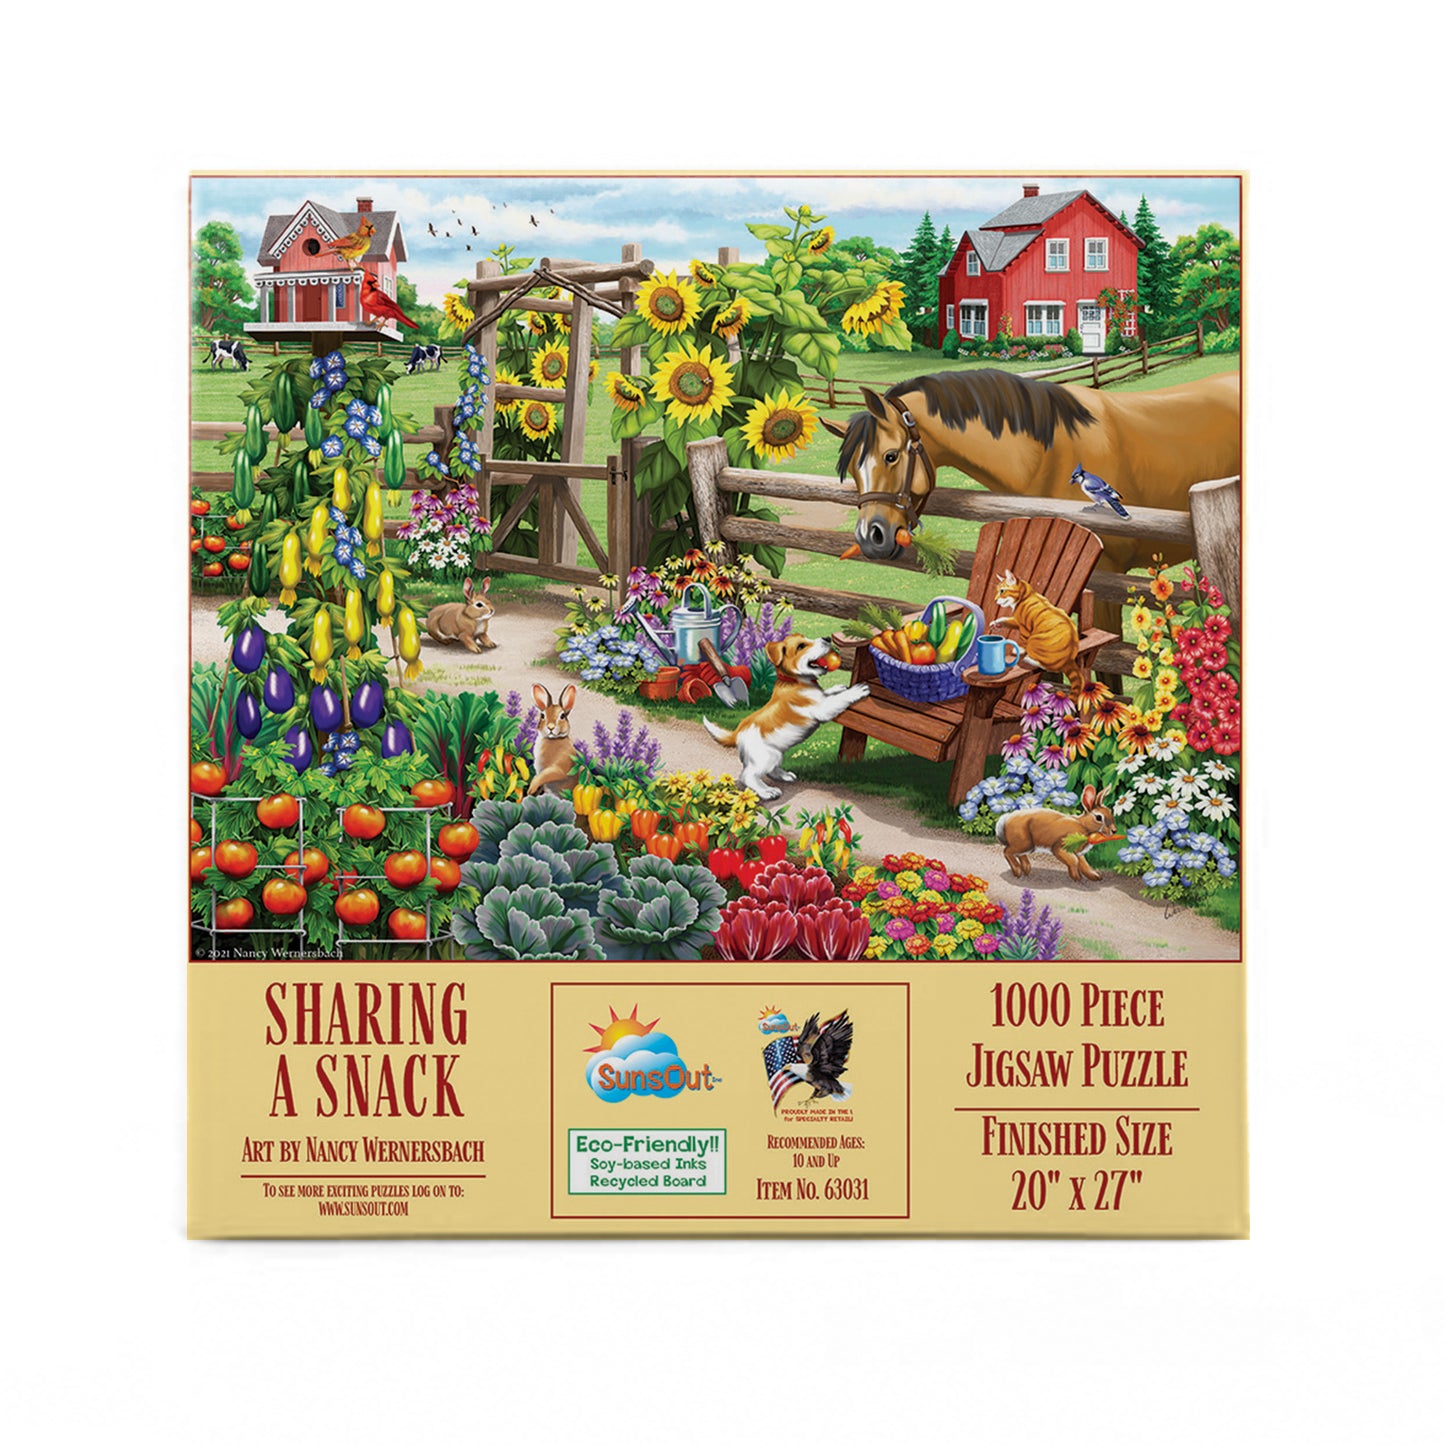 Sharing a Snack - 1000 Piece Jigsaw Puzzle